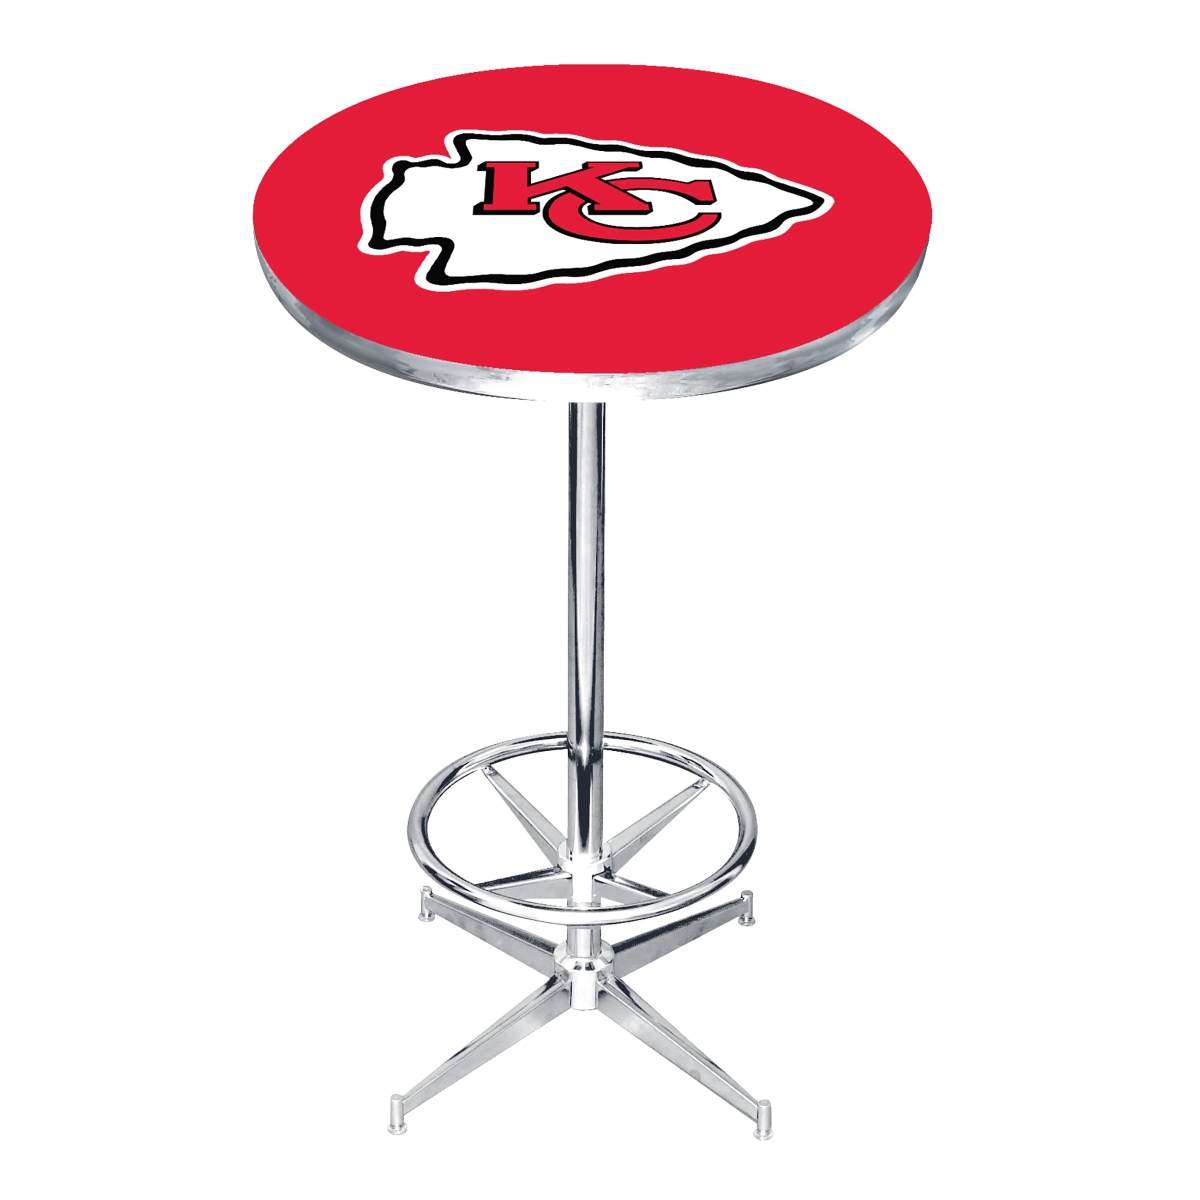 Picture of Imperial International 84-3006 Kansas City Chiefs Pub Table